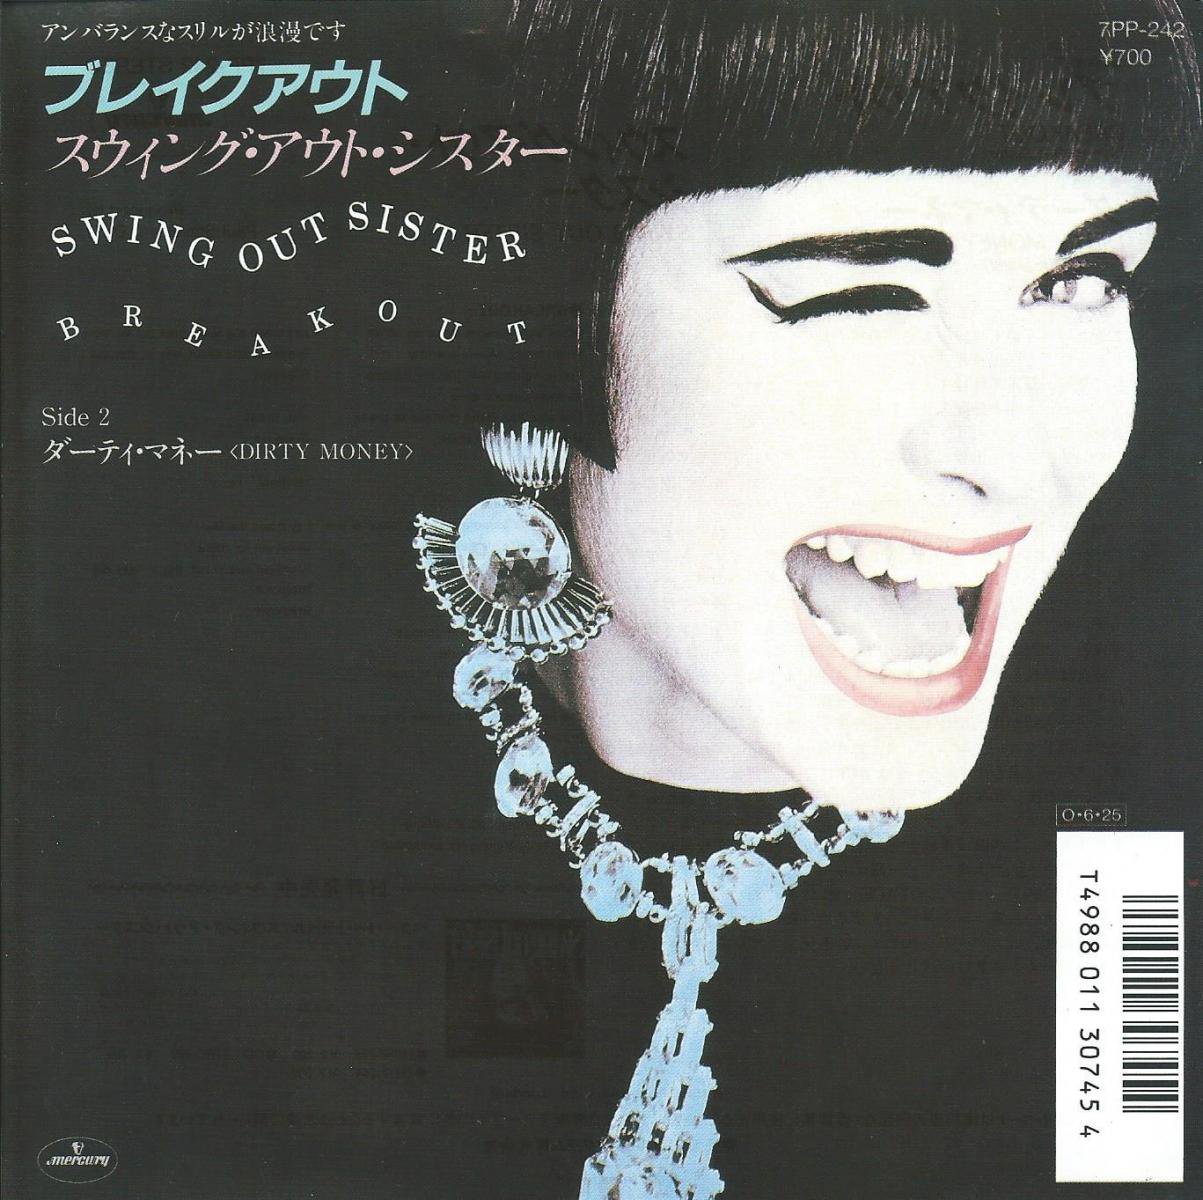 SWING OUT SISTER 󥰡ȡ / BREAKOUT ֥쥤 (7